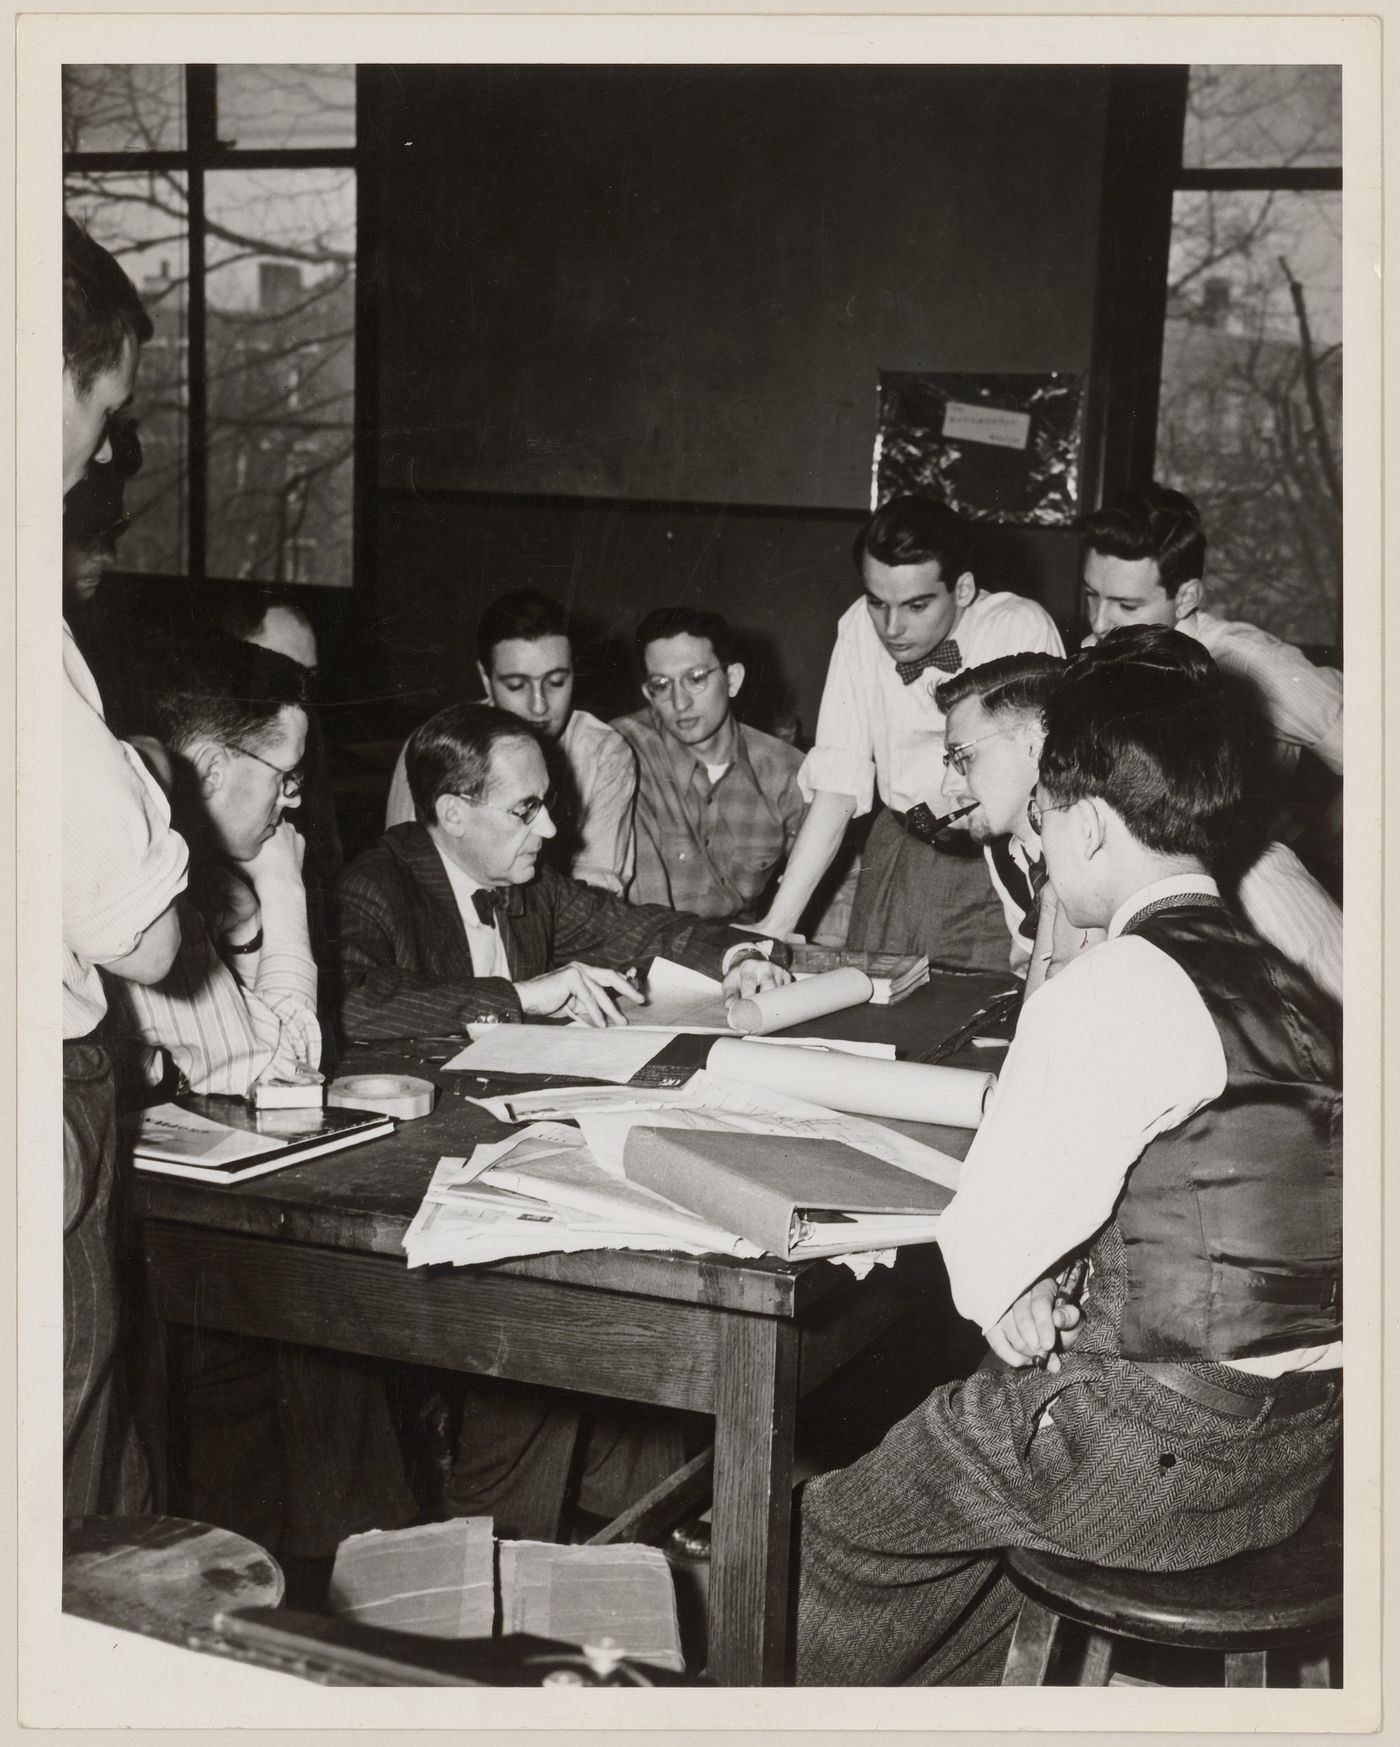 Walter Gropius with Parkin and other students gathered around drawings on table, possibly at Harvard